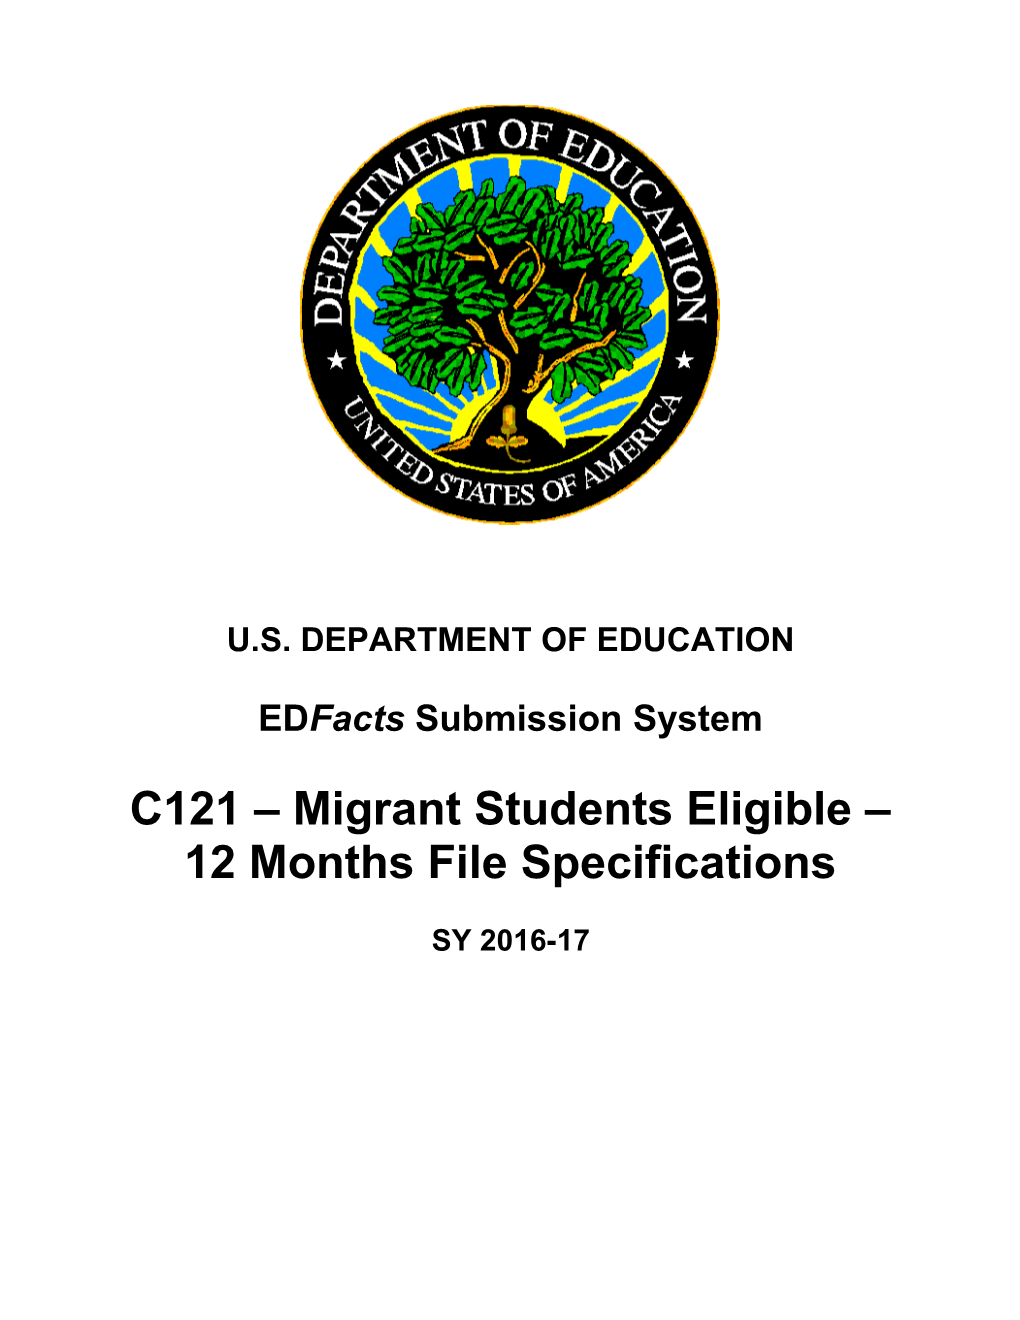 C121 - Migrant Students Eligible -12 Months File Specifications (MS Word)